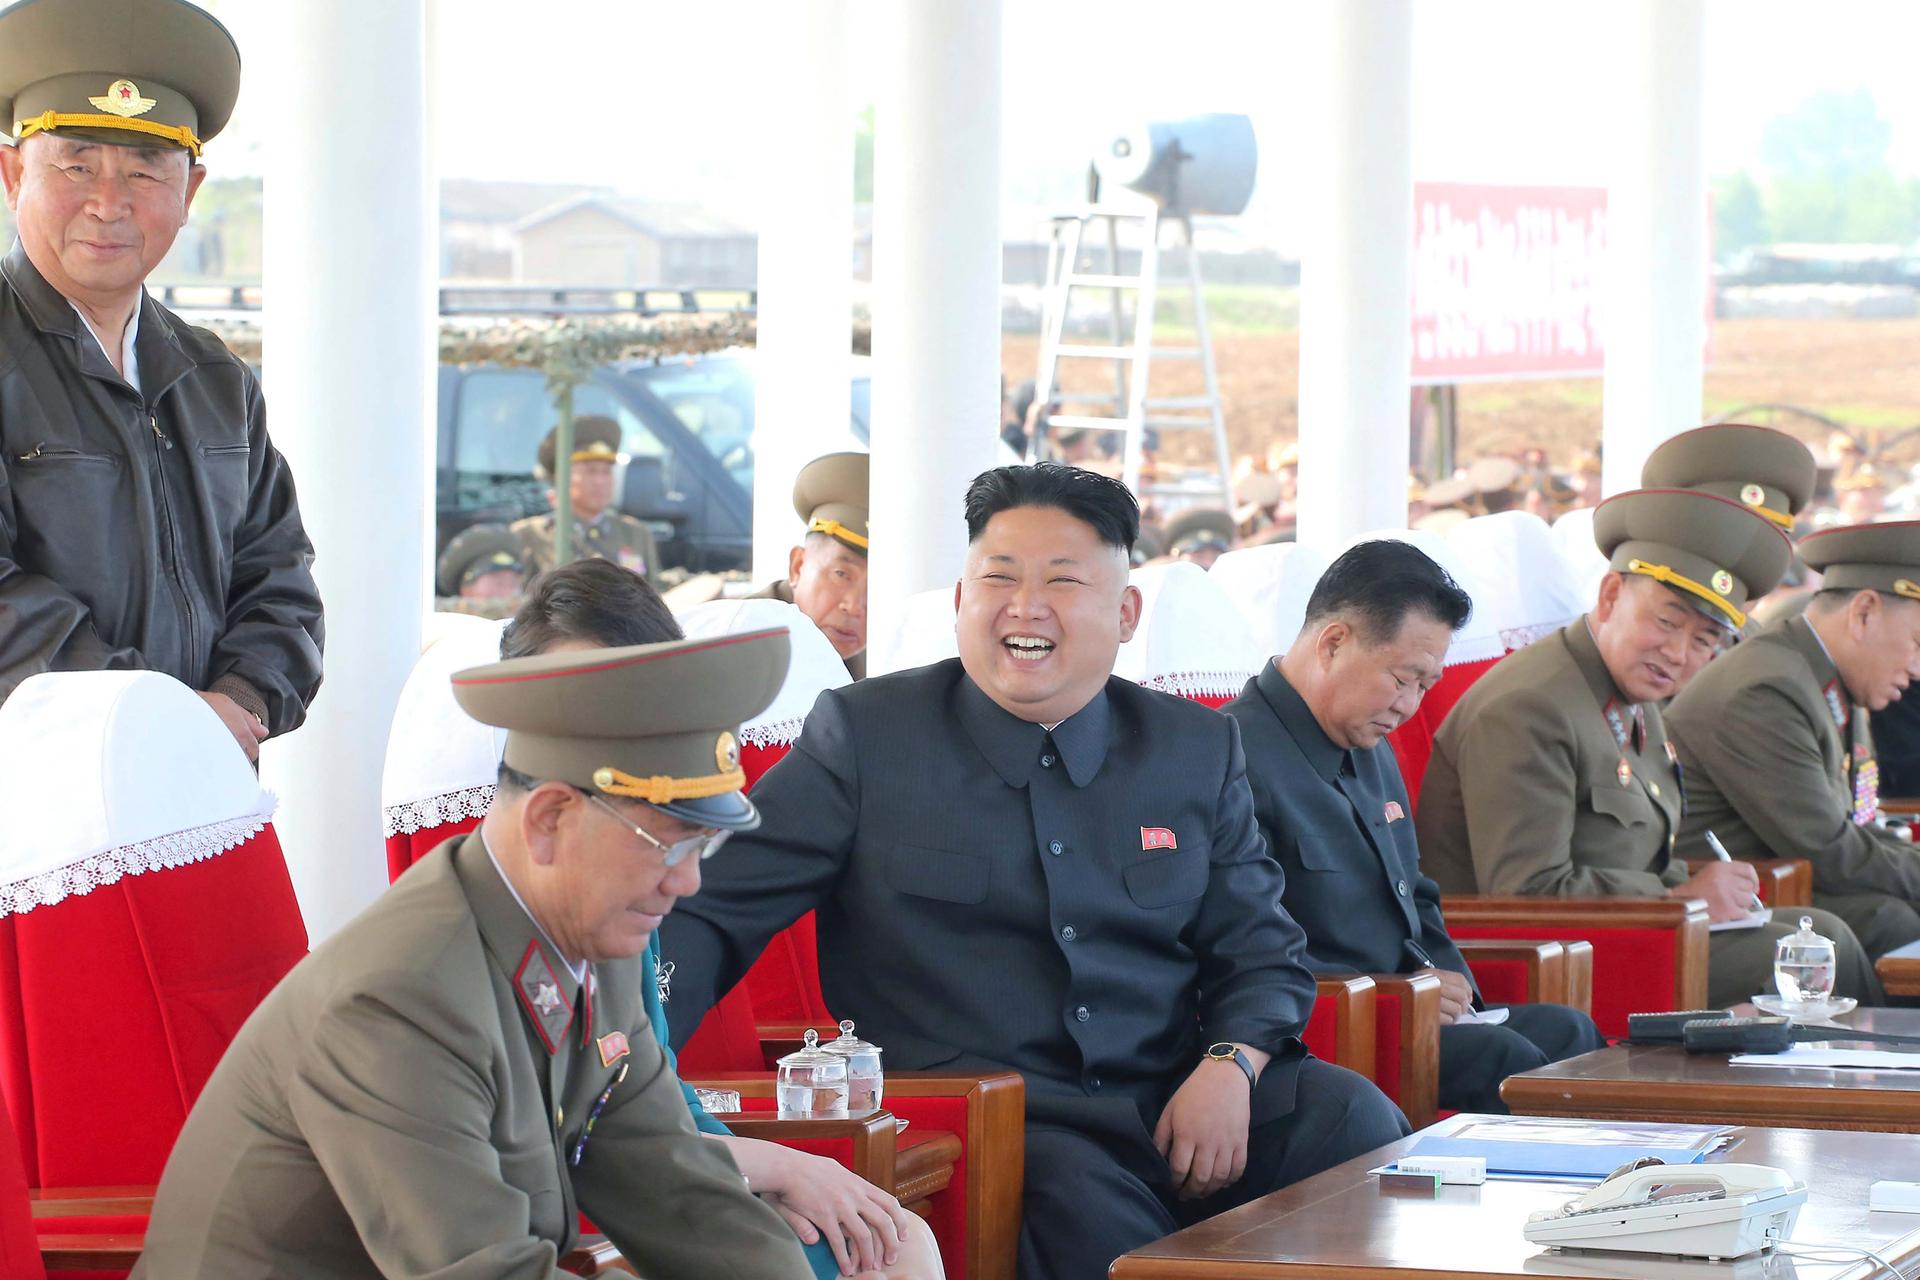 North Korean leader Kim Jong-un watches a display at a military air show with Air Force officers in May 2014.